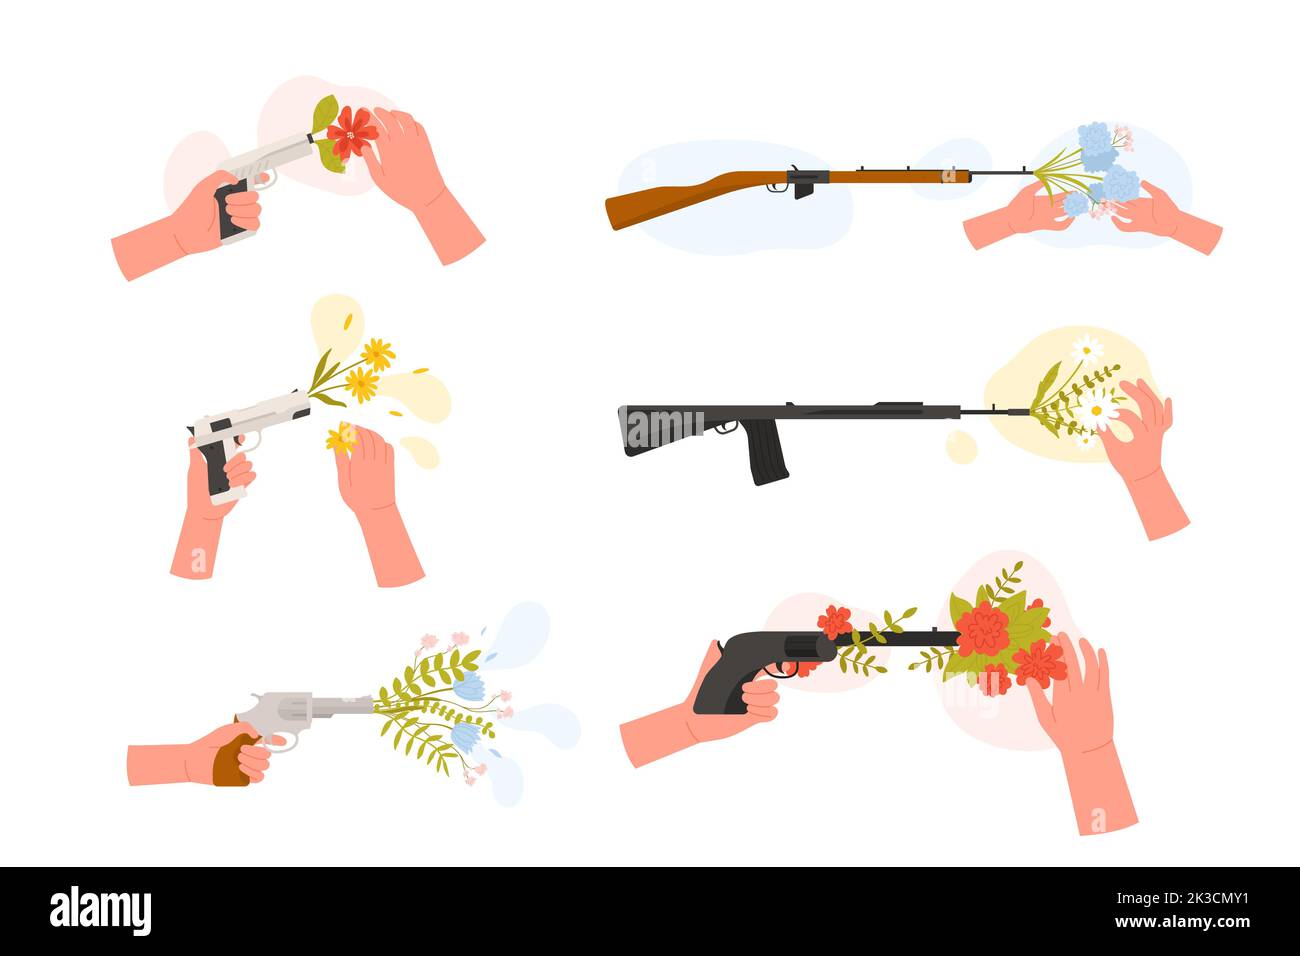 Hand inserting wild flowers into muzzle of gun set vector illustration. Cartoon isolated weapon shooting flowers instead of bullets, hippie symbol of love and peace, protest against war concept Stock Vector